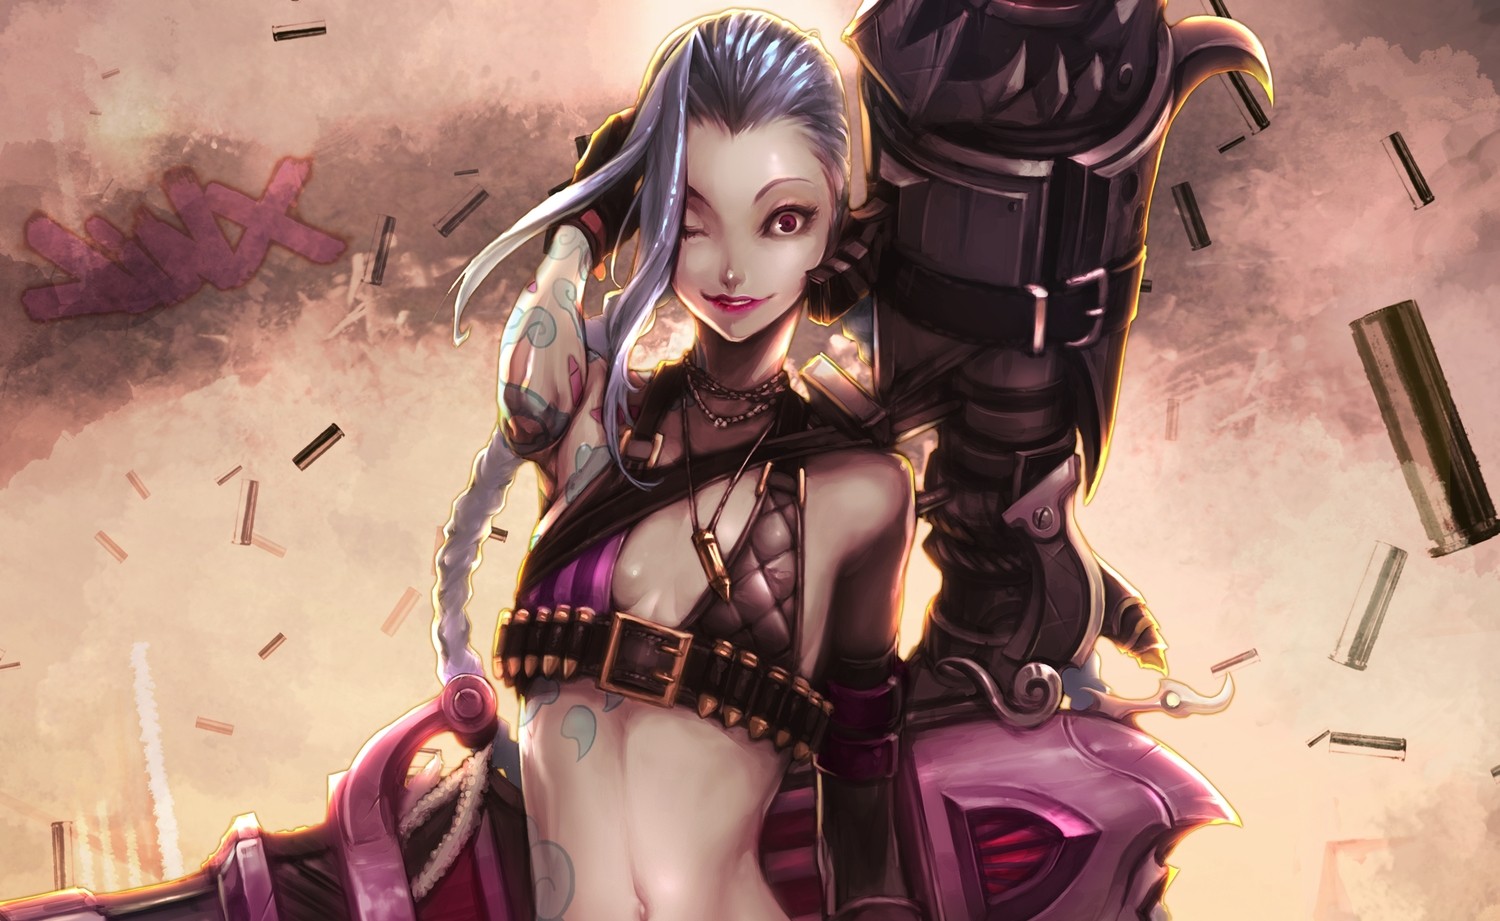 General 1500x921 Jinx (League of Legends) League of Legends blue hair video game characters PC gaming video game girls one eye closed belly inked girls video game art